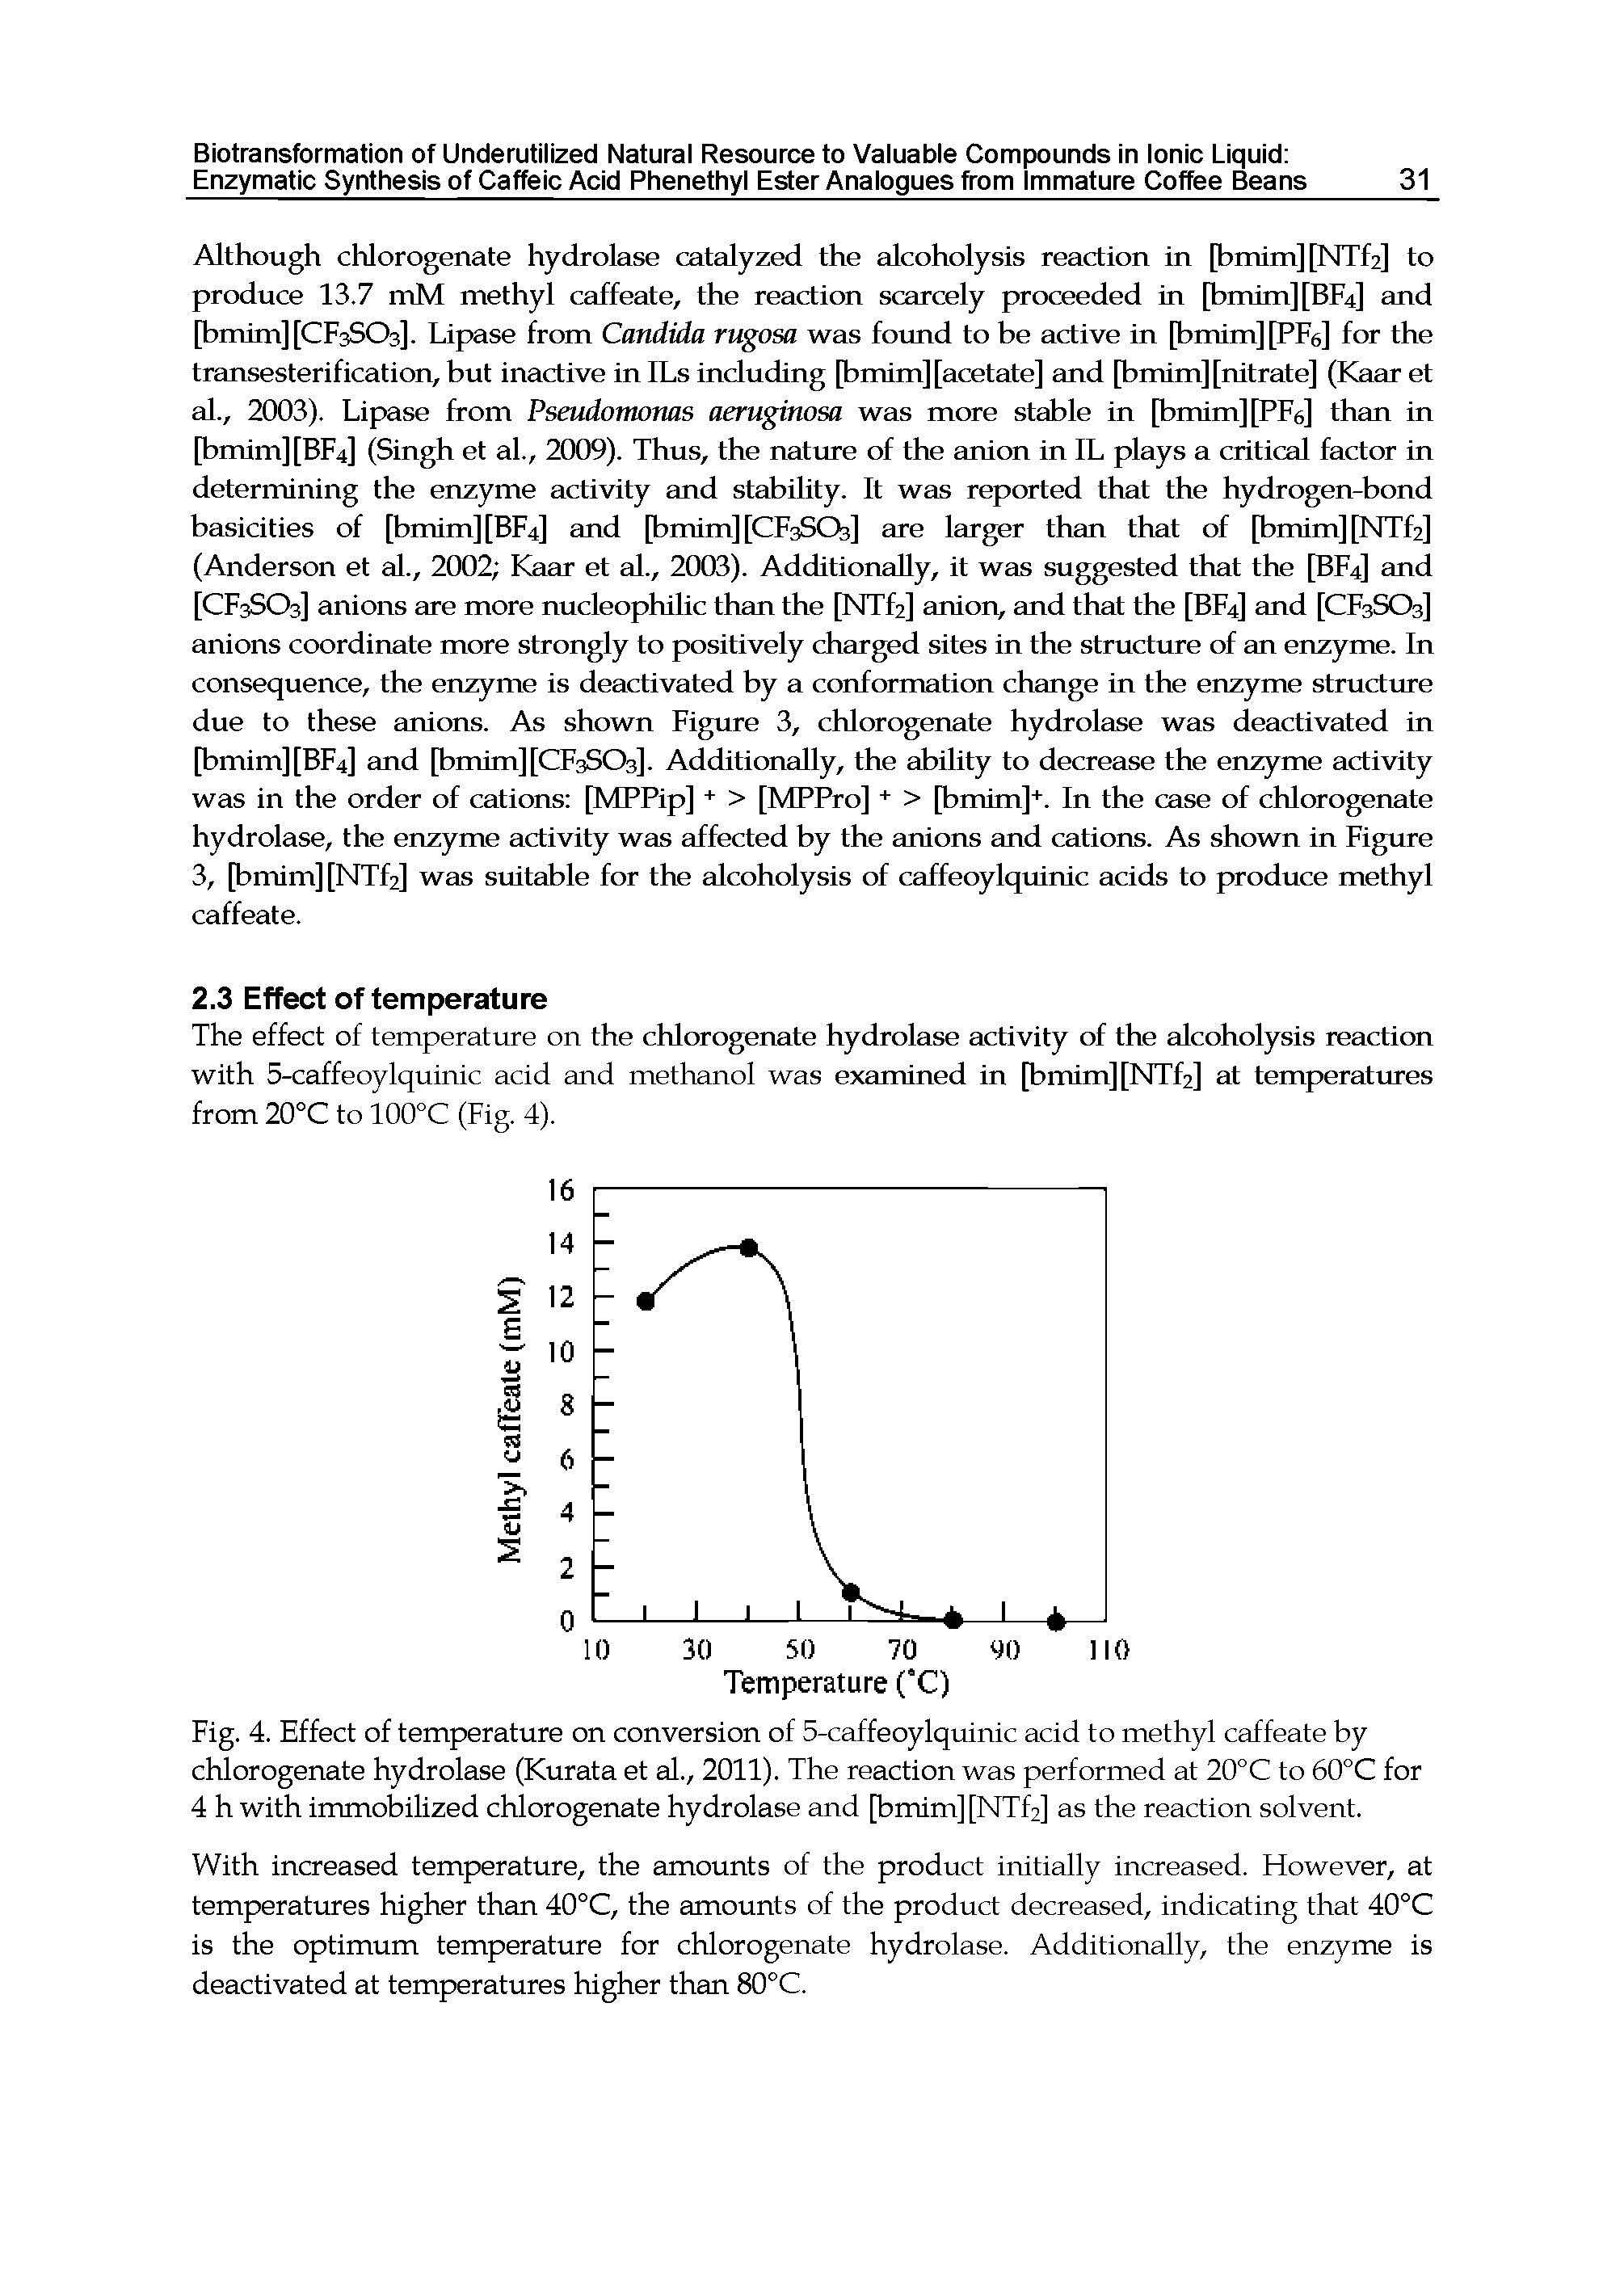 Fig. 4. Effect of temperature on conversion of 5-caffeoylquinic acid to methyl caffeate by chlorogenate hydrolase (Kurata et al., 2011). The reaction was performed at 20°C to 60°C for 4 h with immobilized chlorogenate hydrolase and [bmim][NTf2] as the reaction solvent.